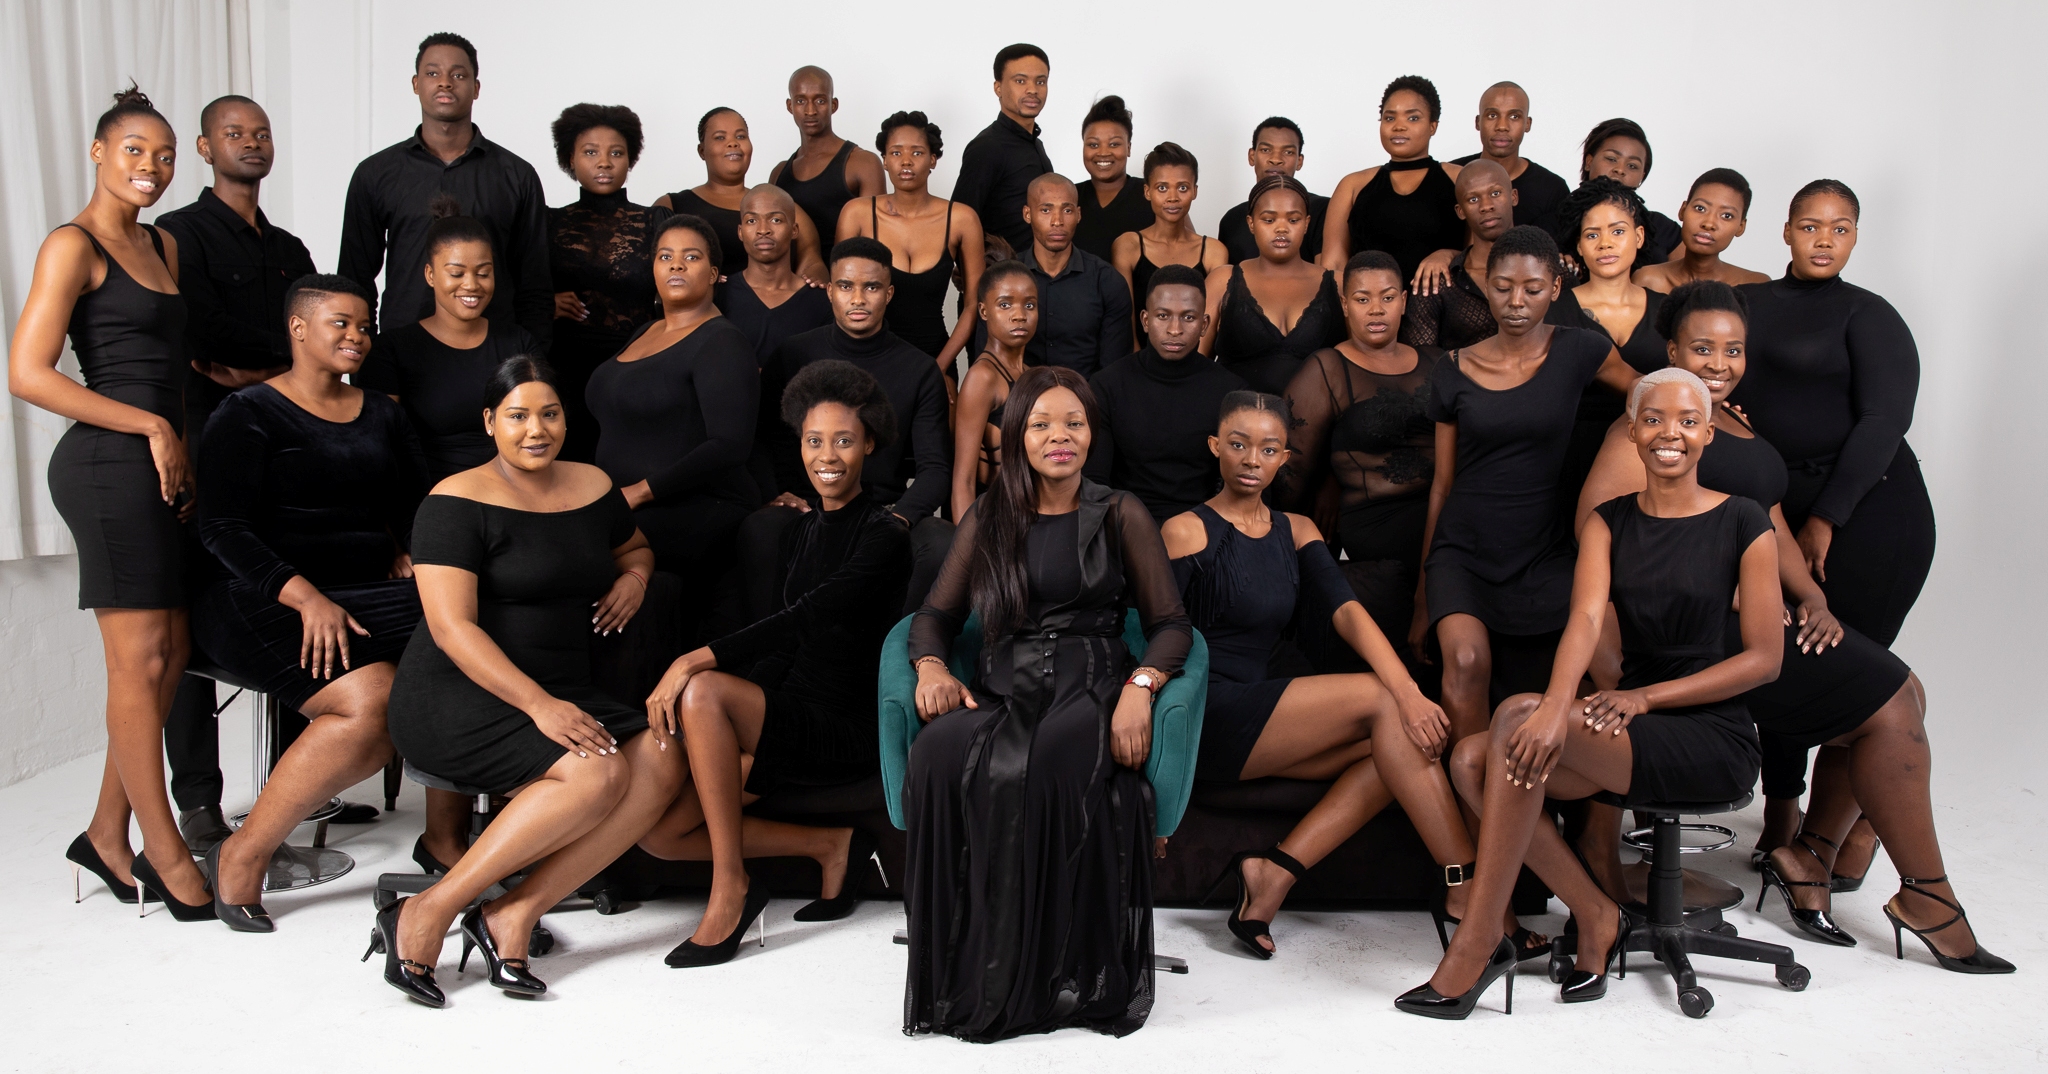 Durban Fashion Festival New Faces - the Class of 2019 unveiled!